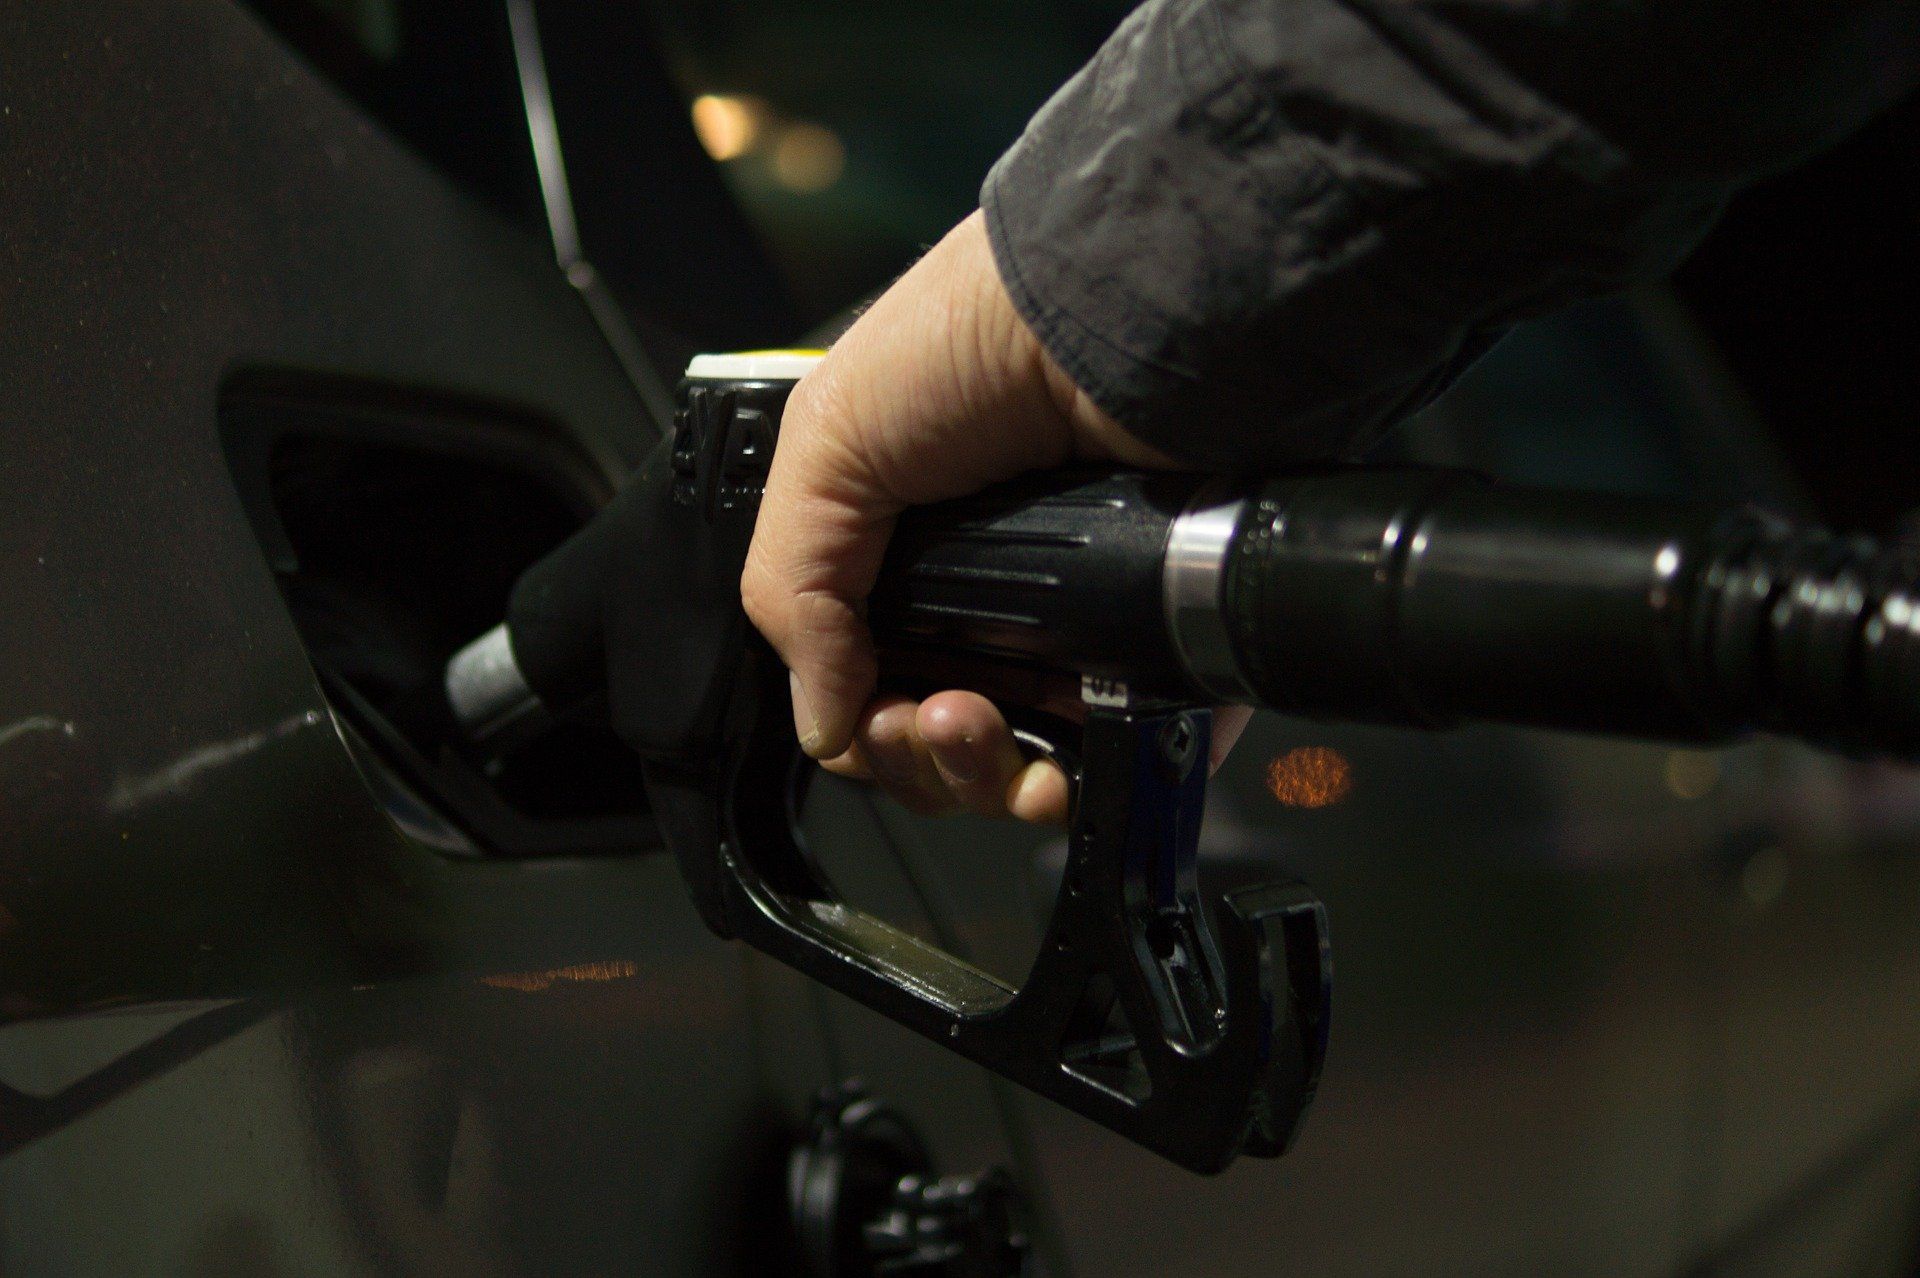 Fuel Price today: Petrol priced at Rs 95.41, diesel Rs 86.67 in Delhi on December 22